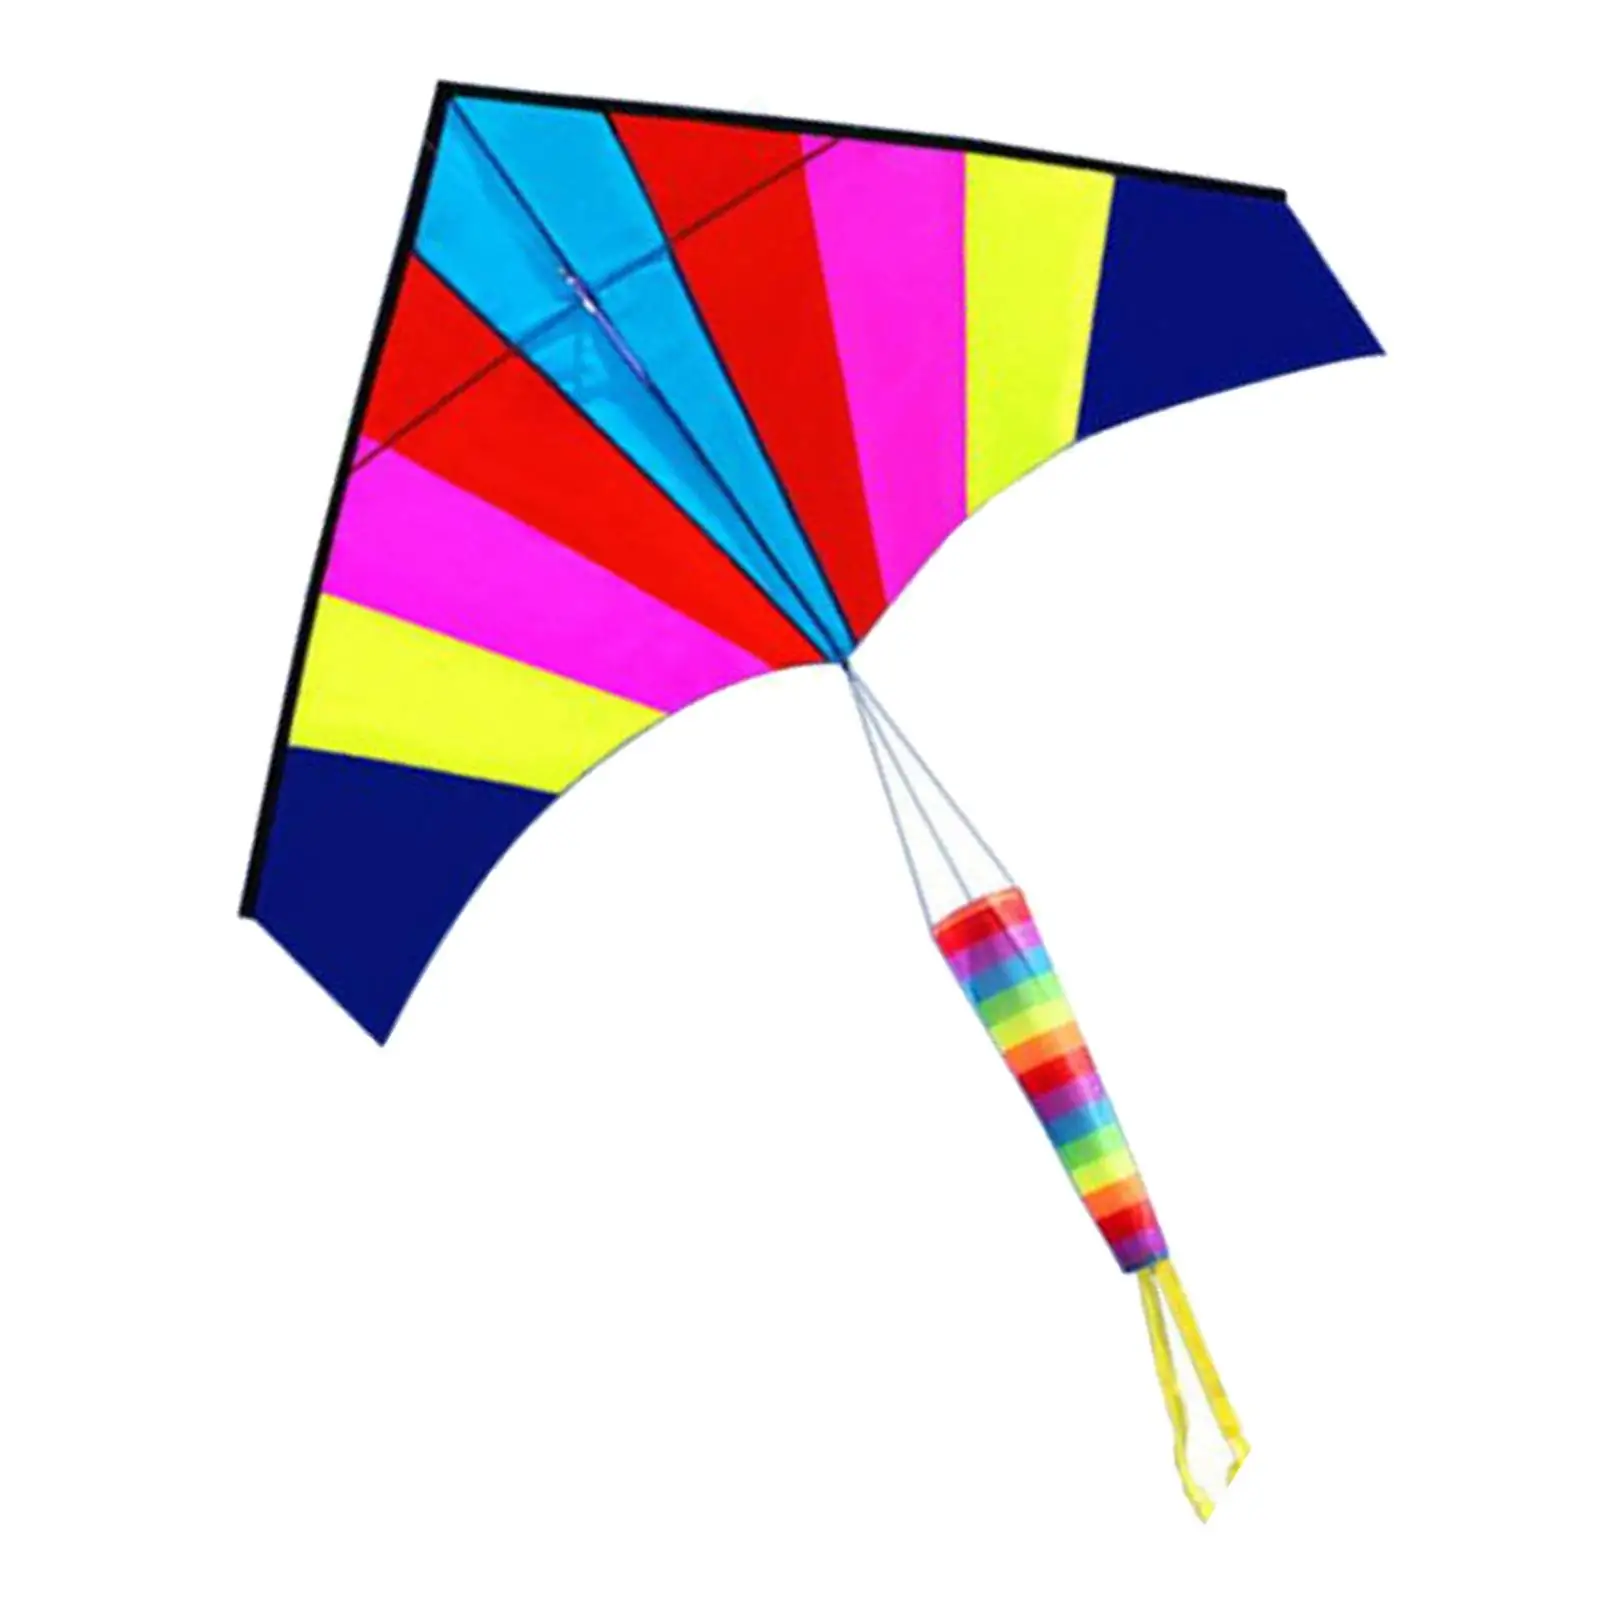 Giant Delta Kite with String for Family Trips Games Teenagers